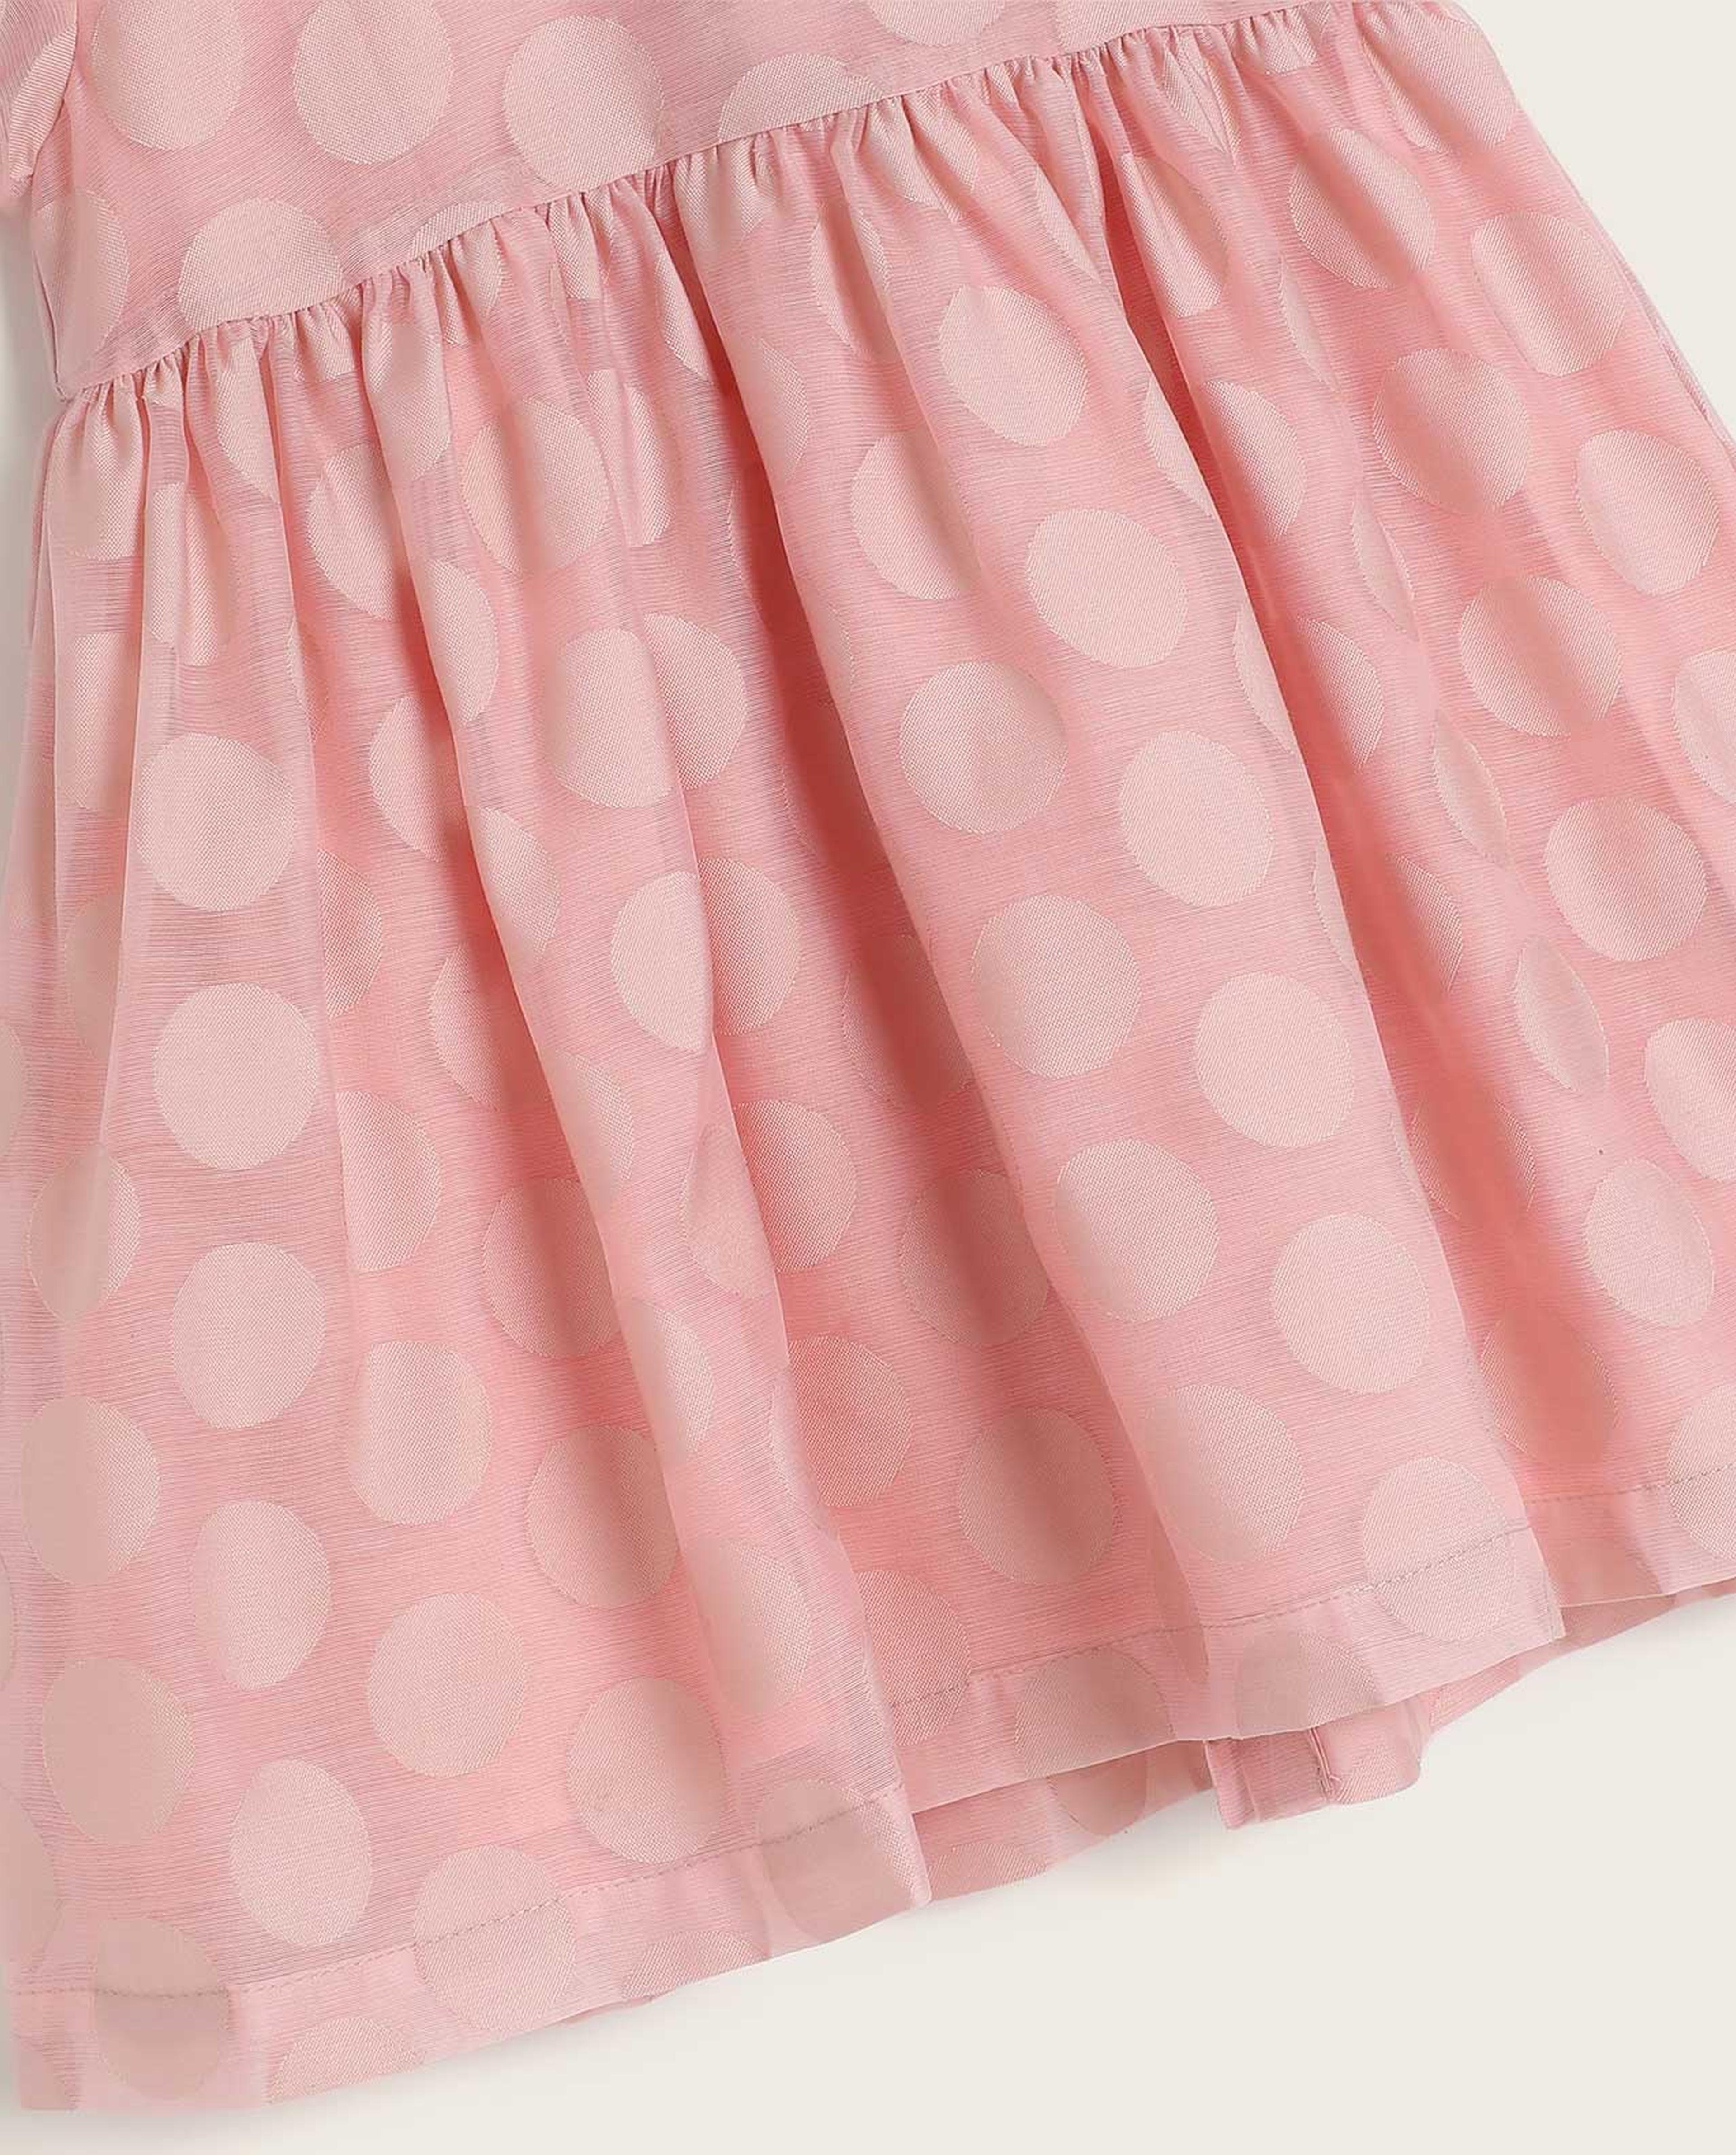 Polka Dots Fit and Flare Dress with Puff Sleeves